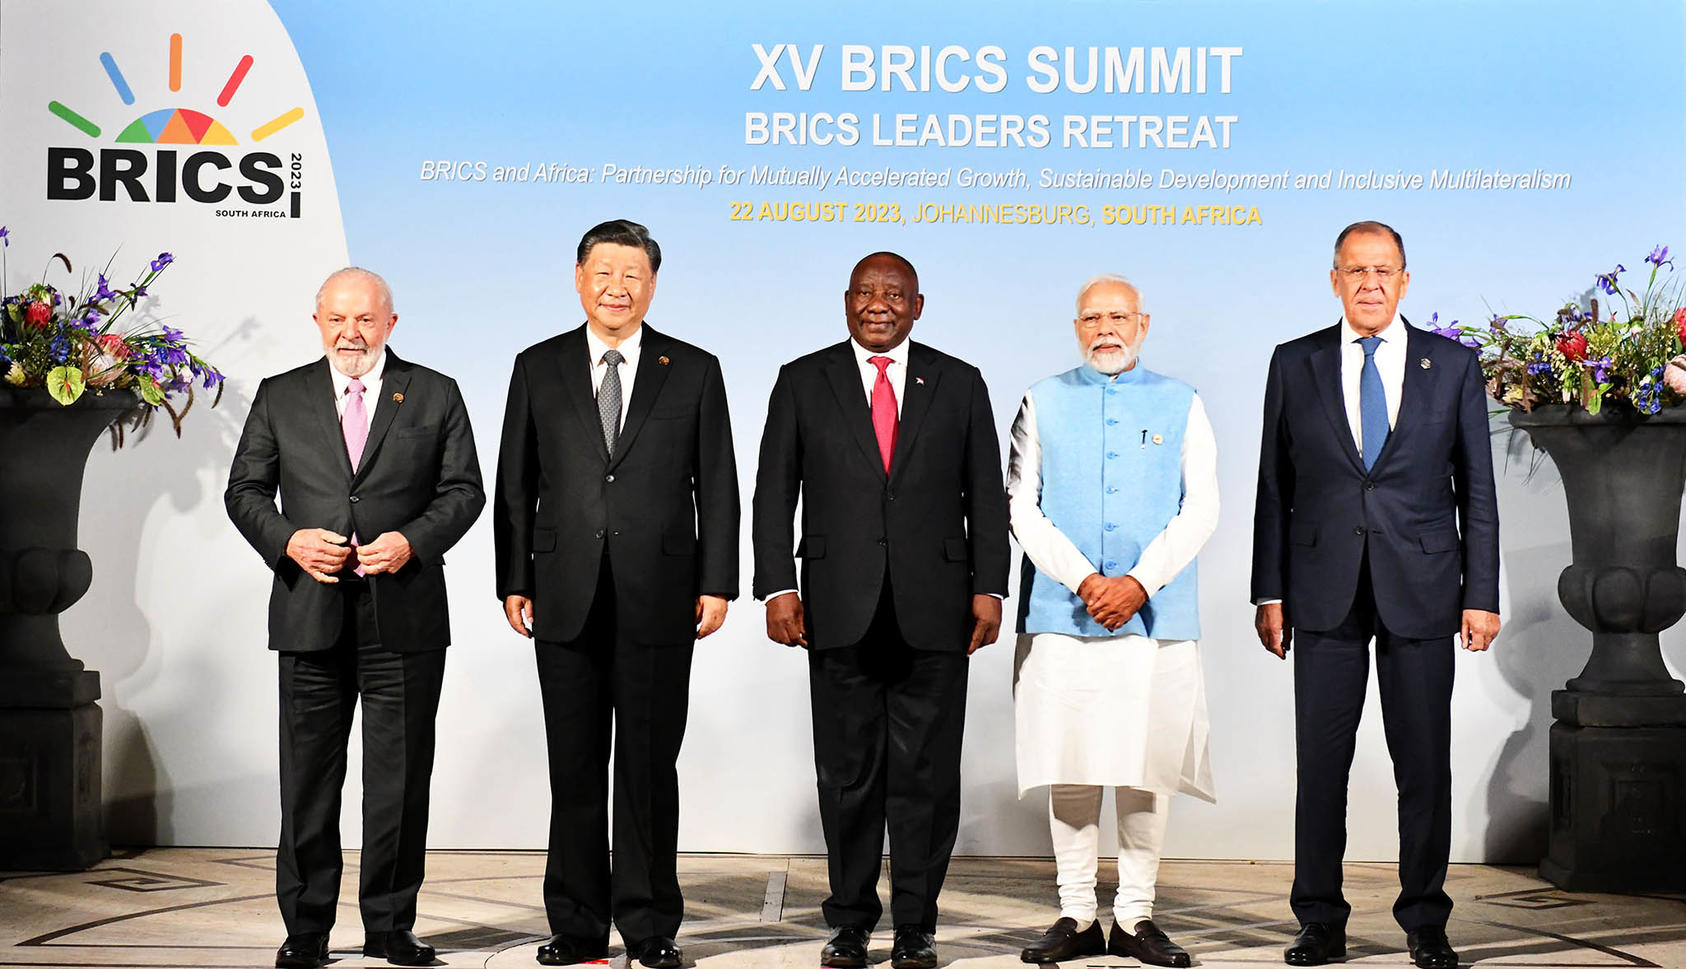 Brazilian President Lula da Silva, Chinese leader Xi Jinping, South African President Cyril Ramaphosa, Indian President Narenda Modi, and Russian Foreign Minister Sergei Lavrov at the BRICS summit, Aug. 22, 2023. (Government of South Africa)